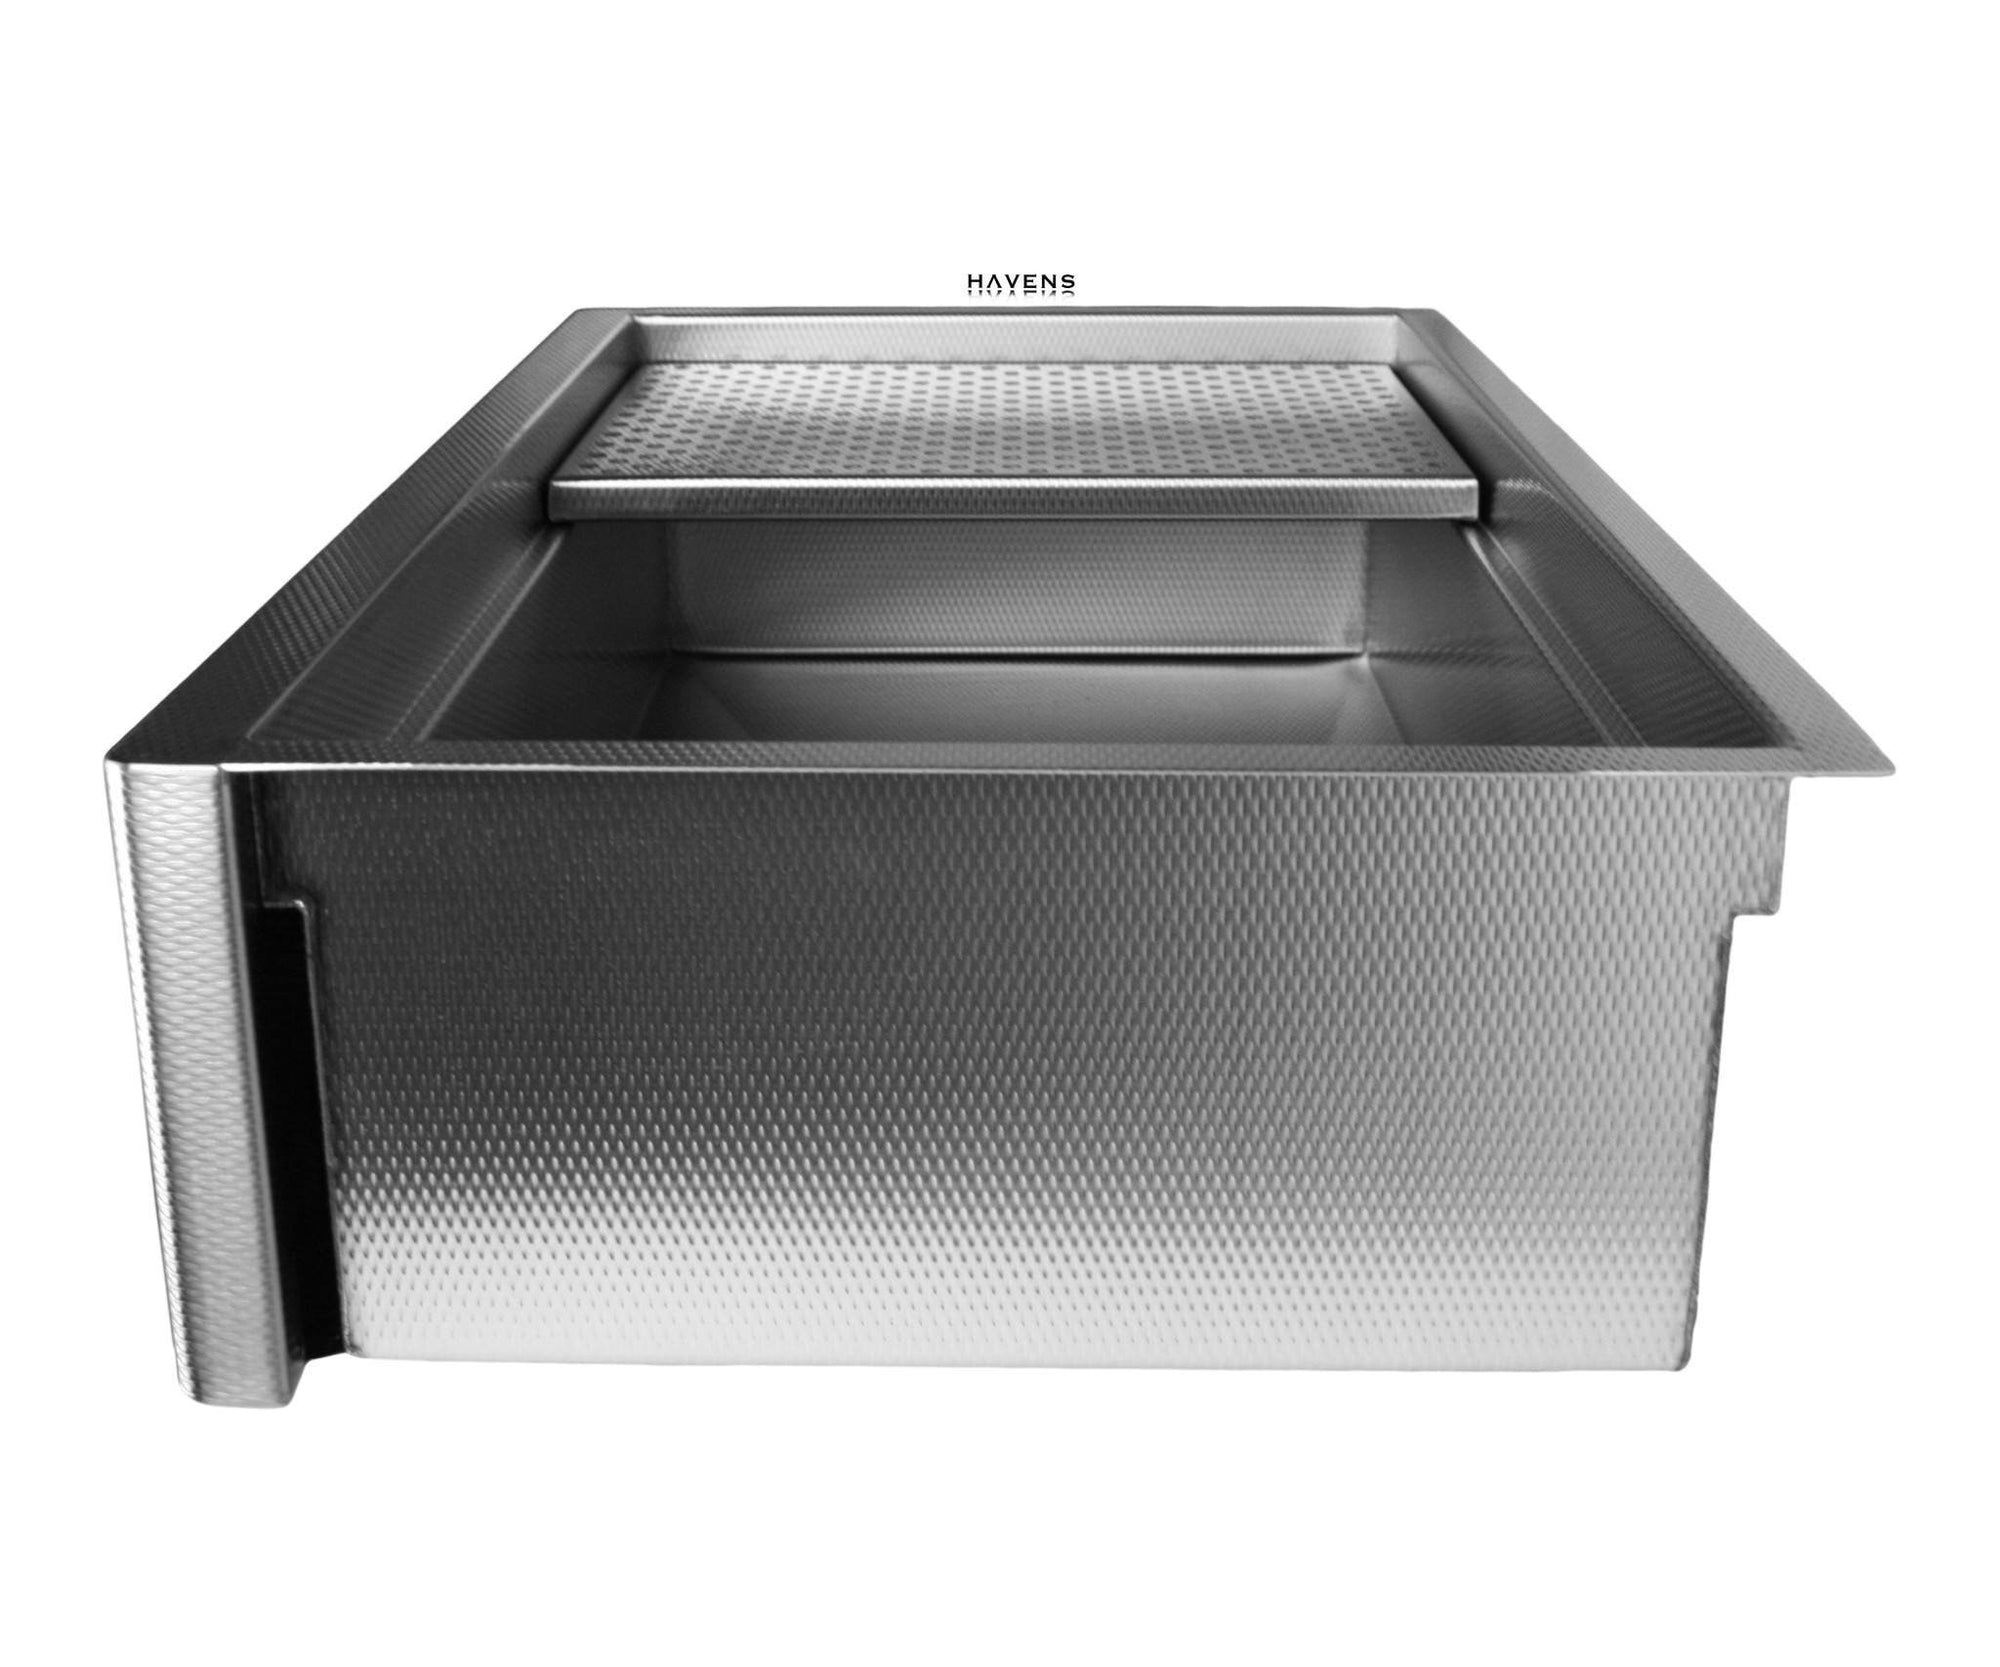 Apron front stainless steel Legacy sink